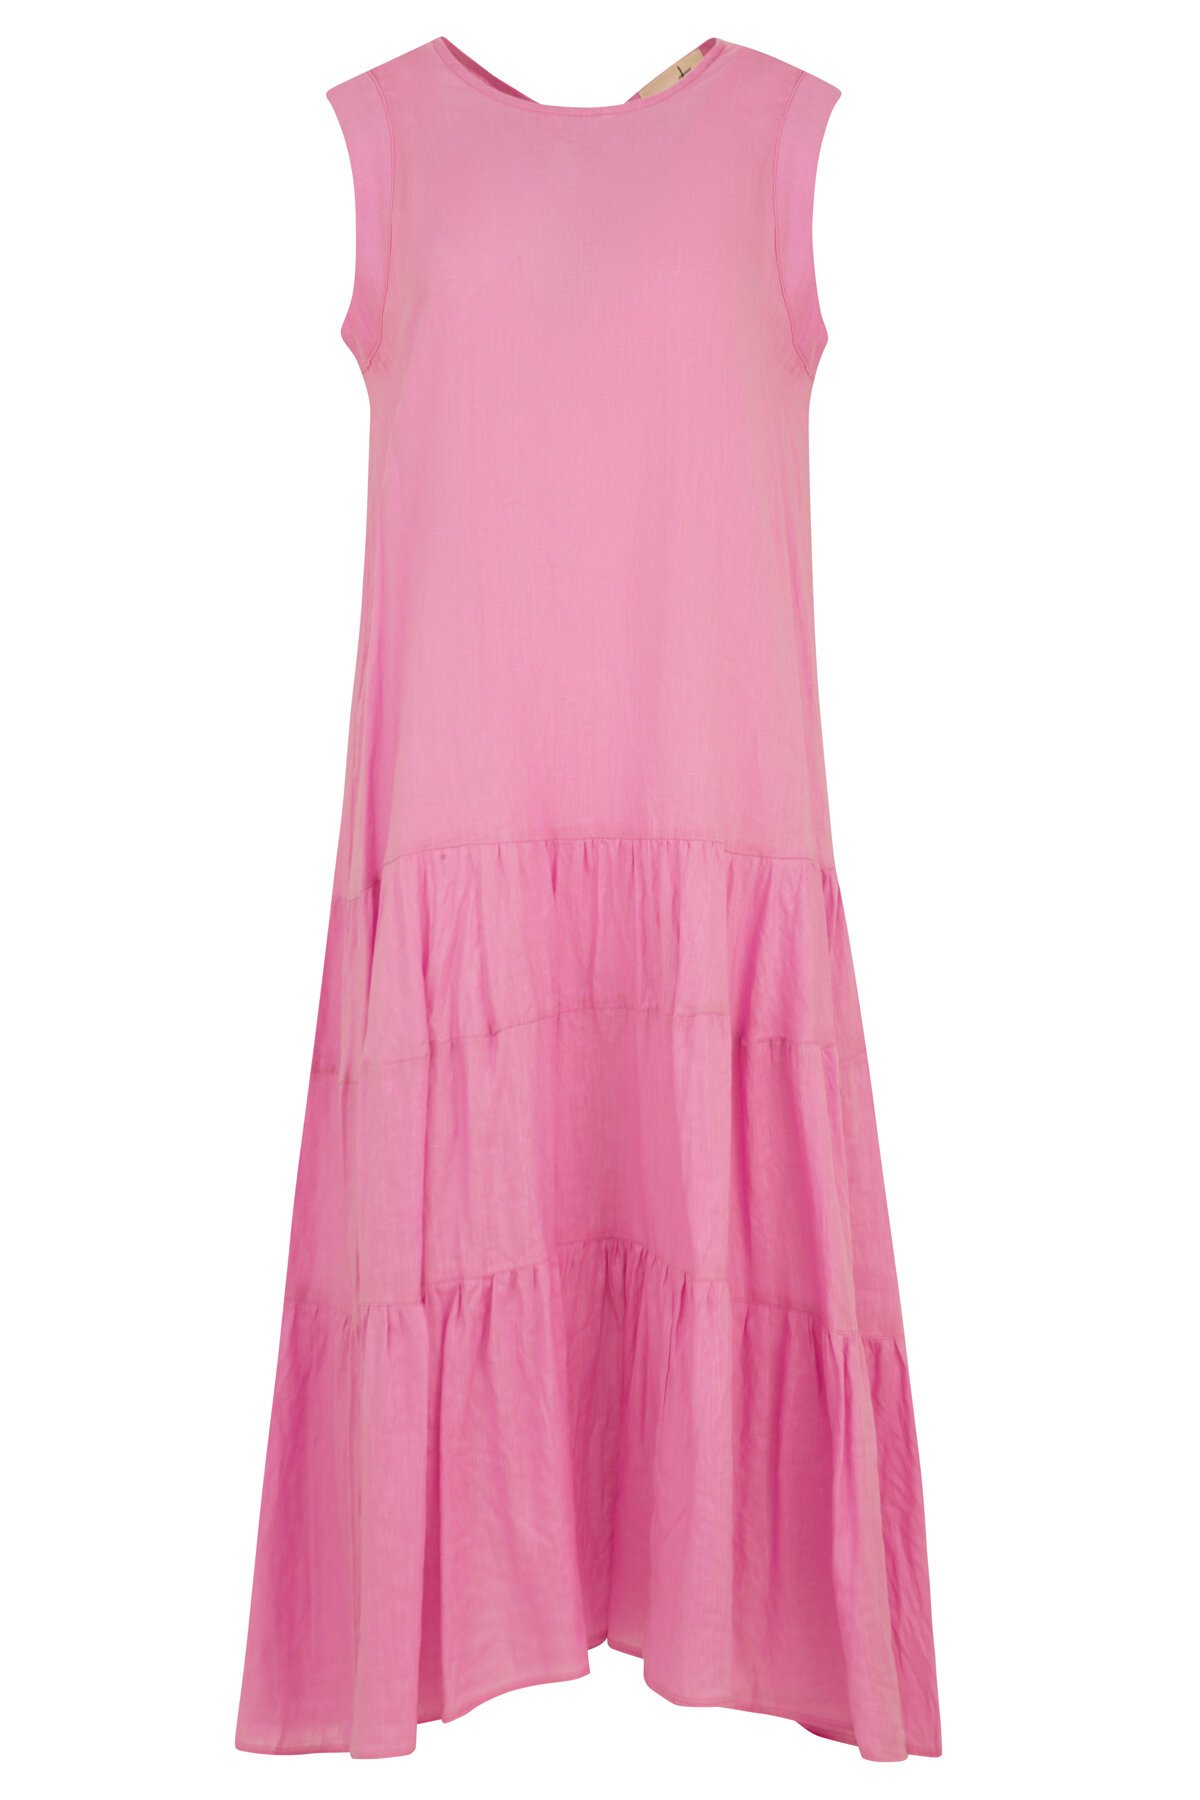 GO EASY Dress - Curate : Trelise Cooper Online - SAVE IT FOR SUMMER ...